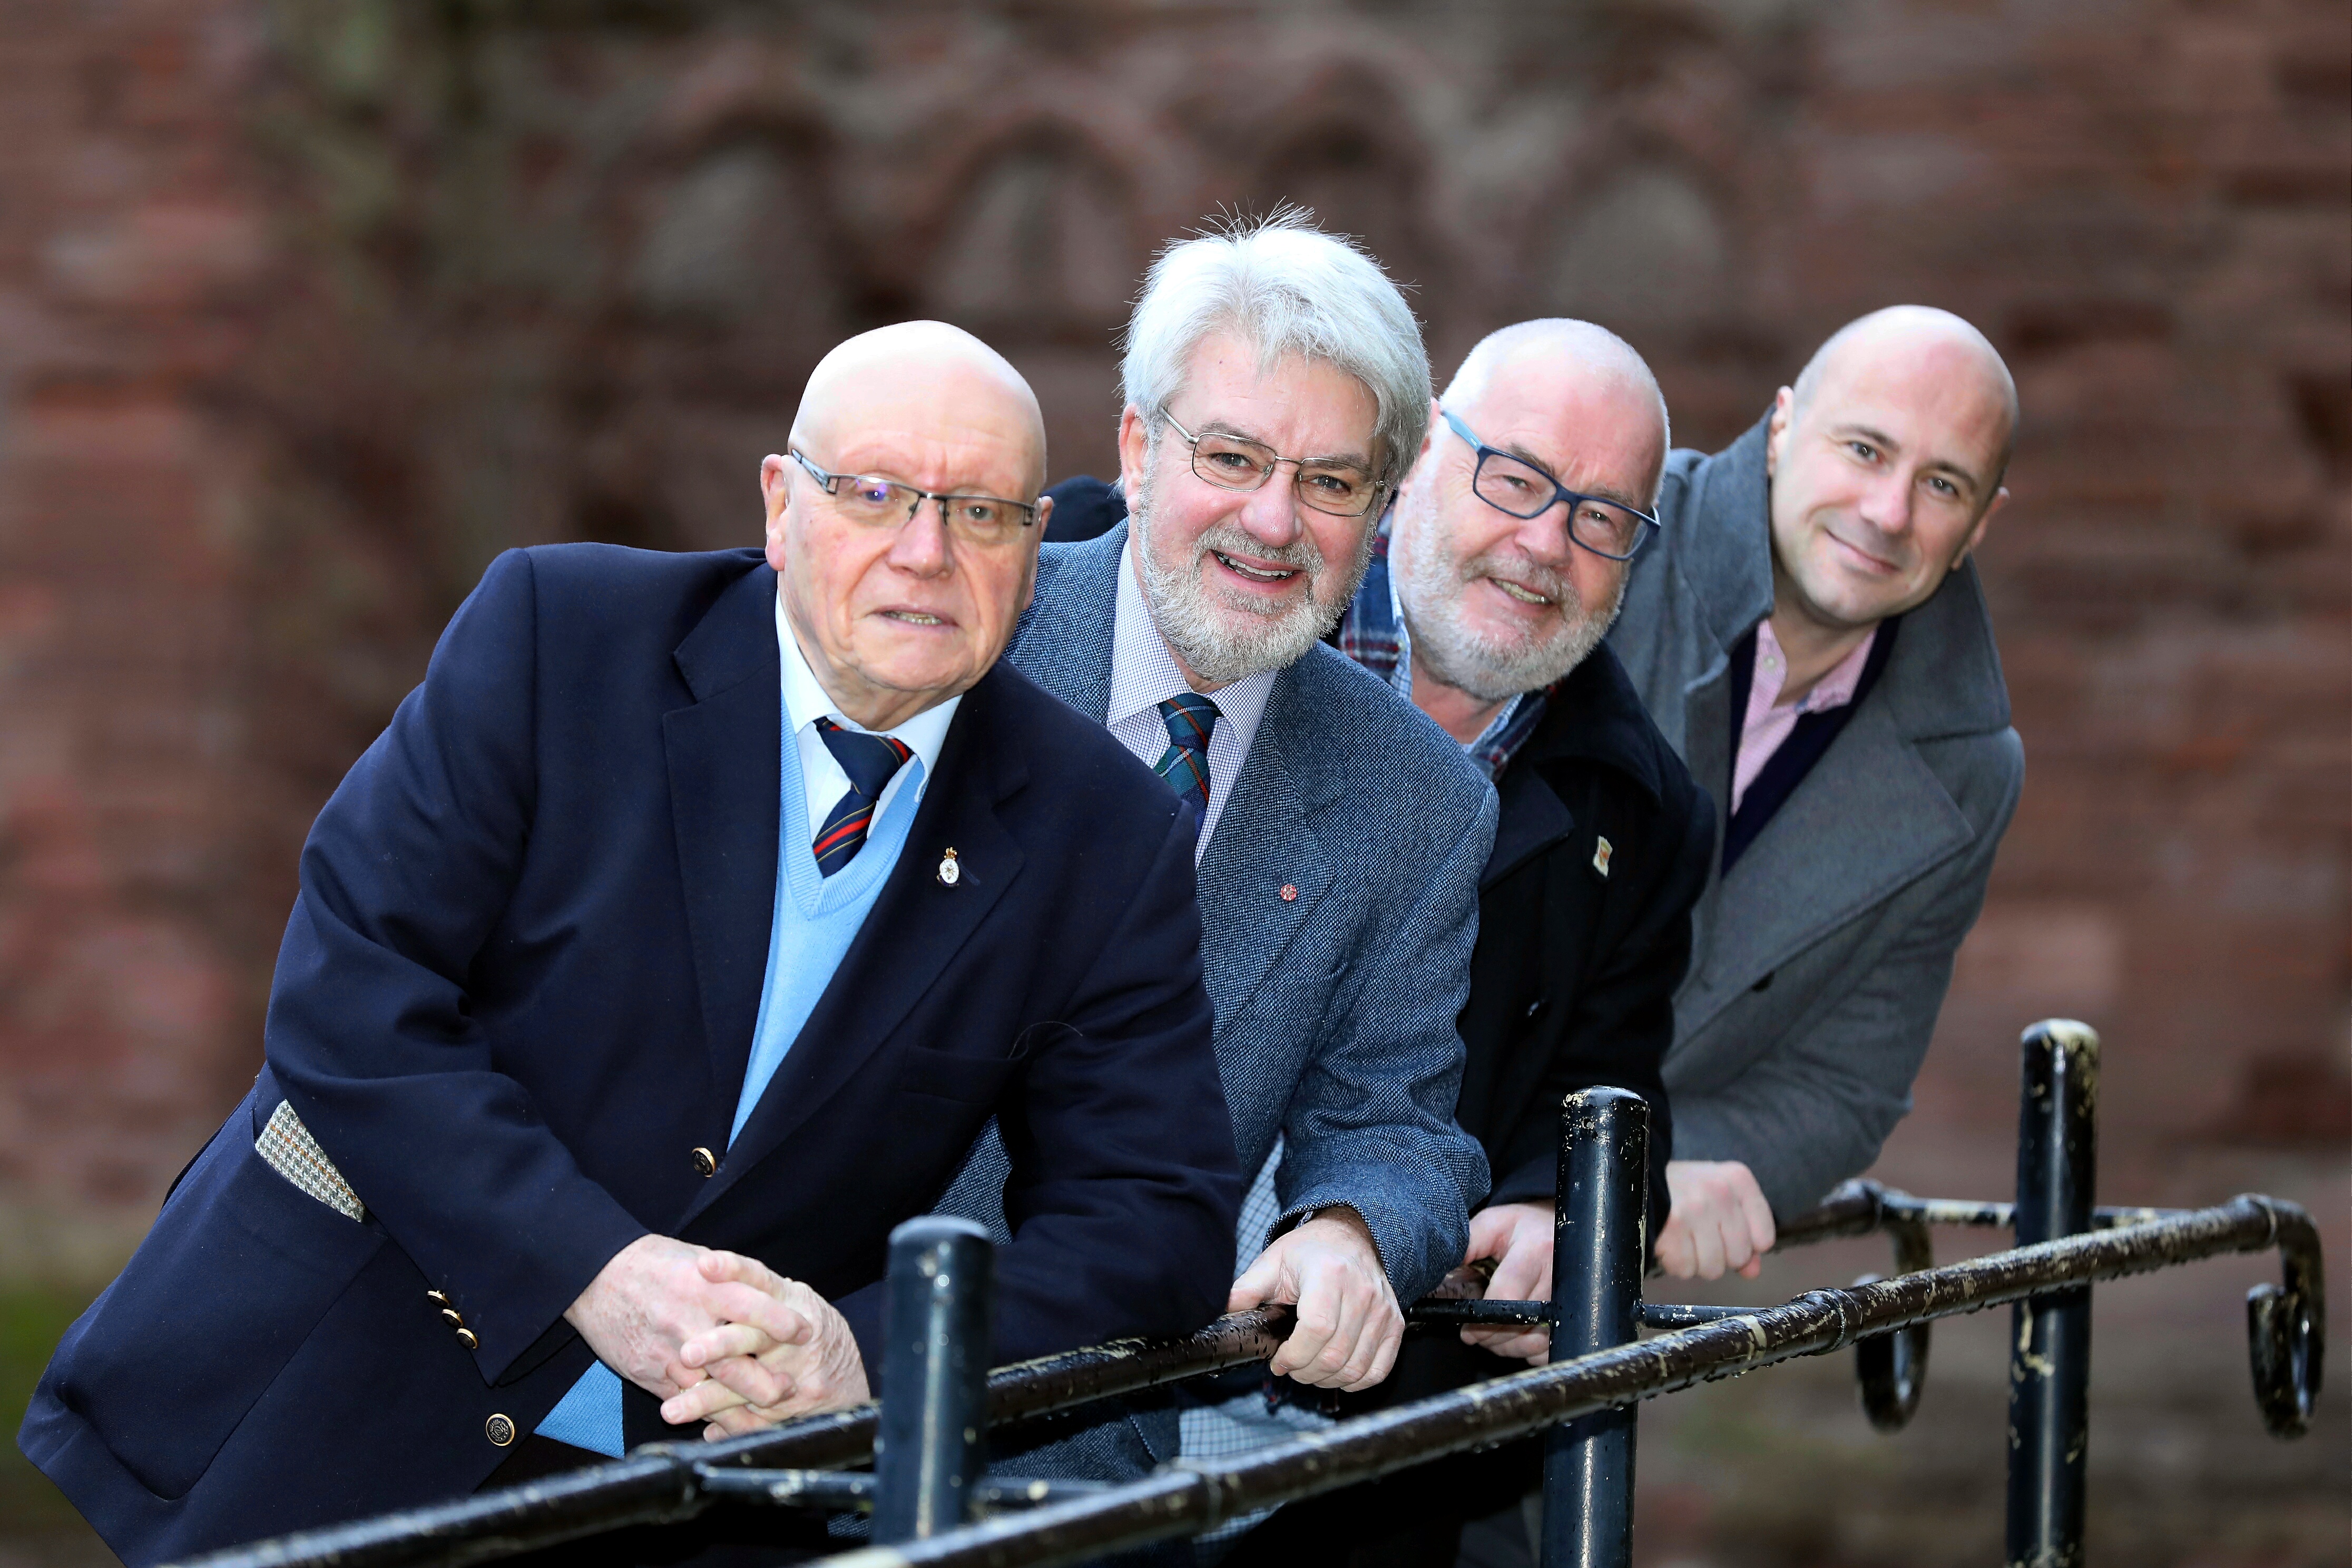 Geoff Bray (Arbroath 2020 committee), Lord Leiutenant Norman Atkinson, David Fairweather (council leader) and Derek Wann (local councillor)  at the abbey.